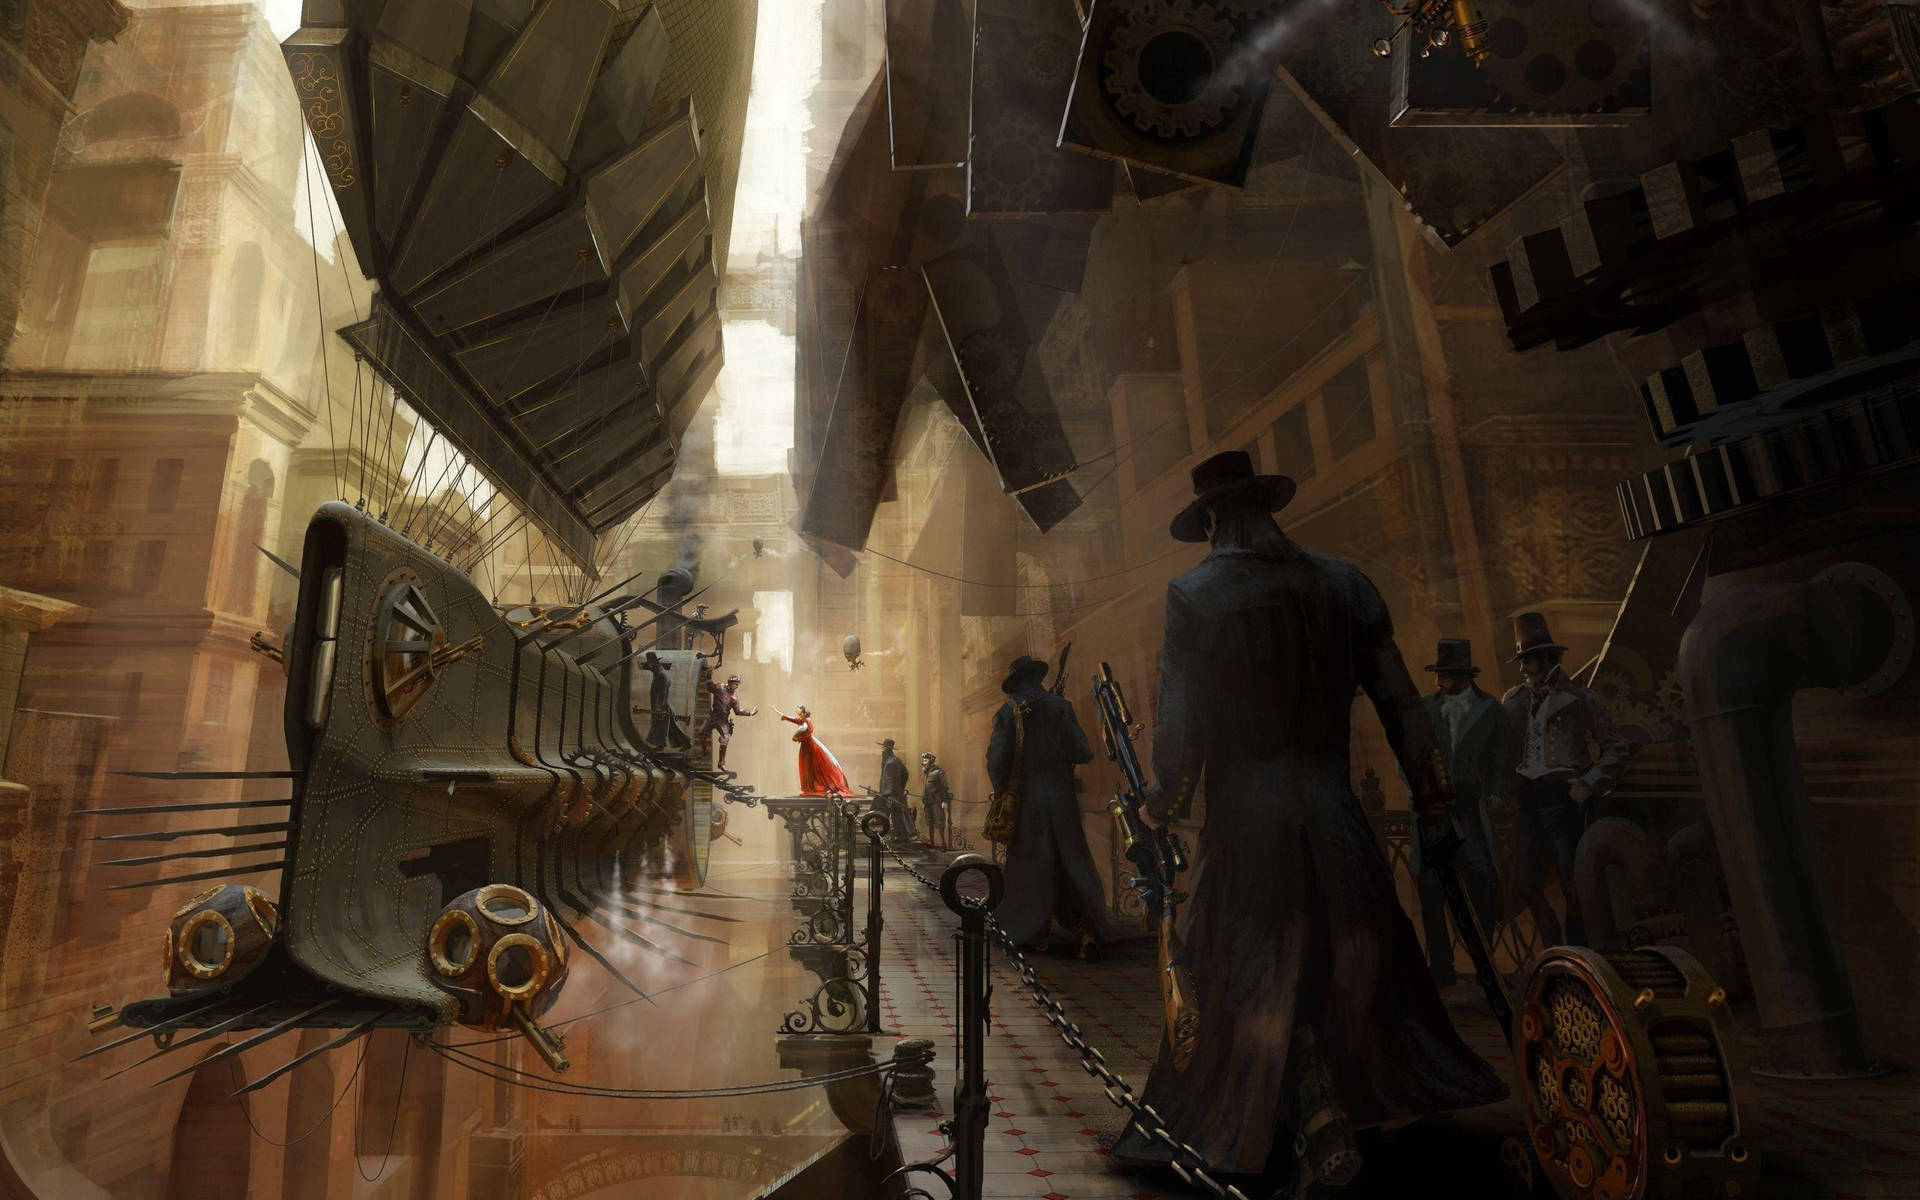 A majestic Steampunk airship docks in port, ready to explore the unknown Wallpaper